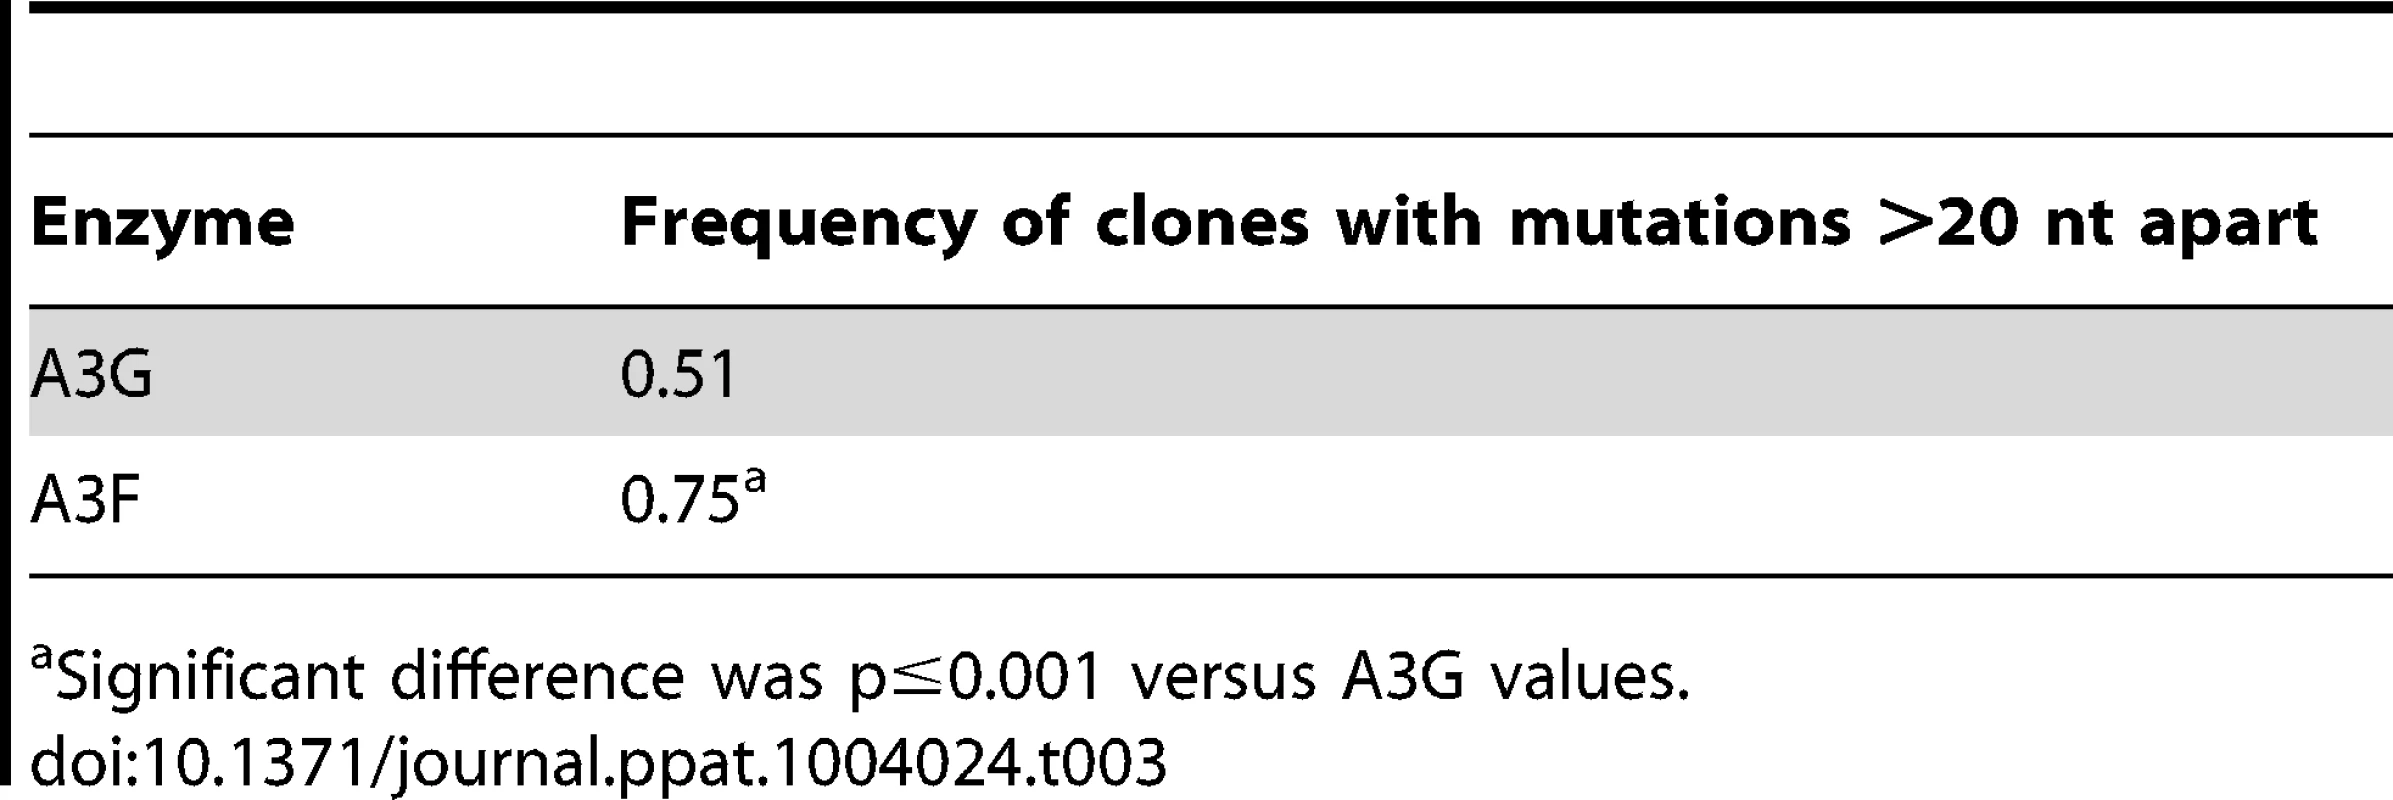 Analysis of distances between G→A mutations for A3G and A3F.